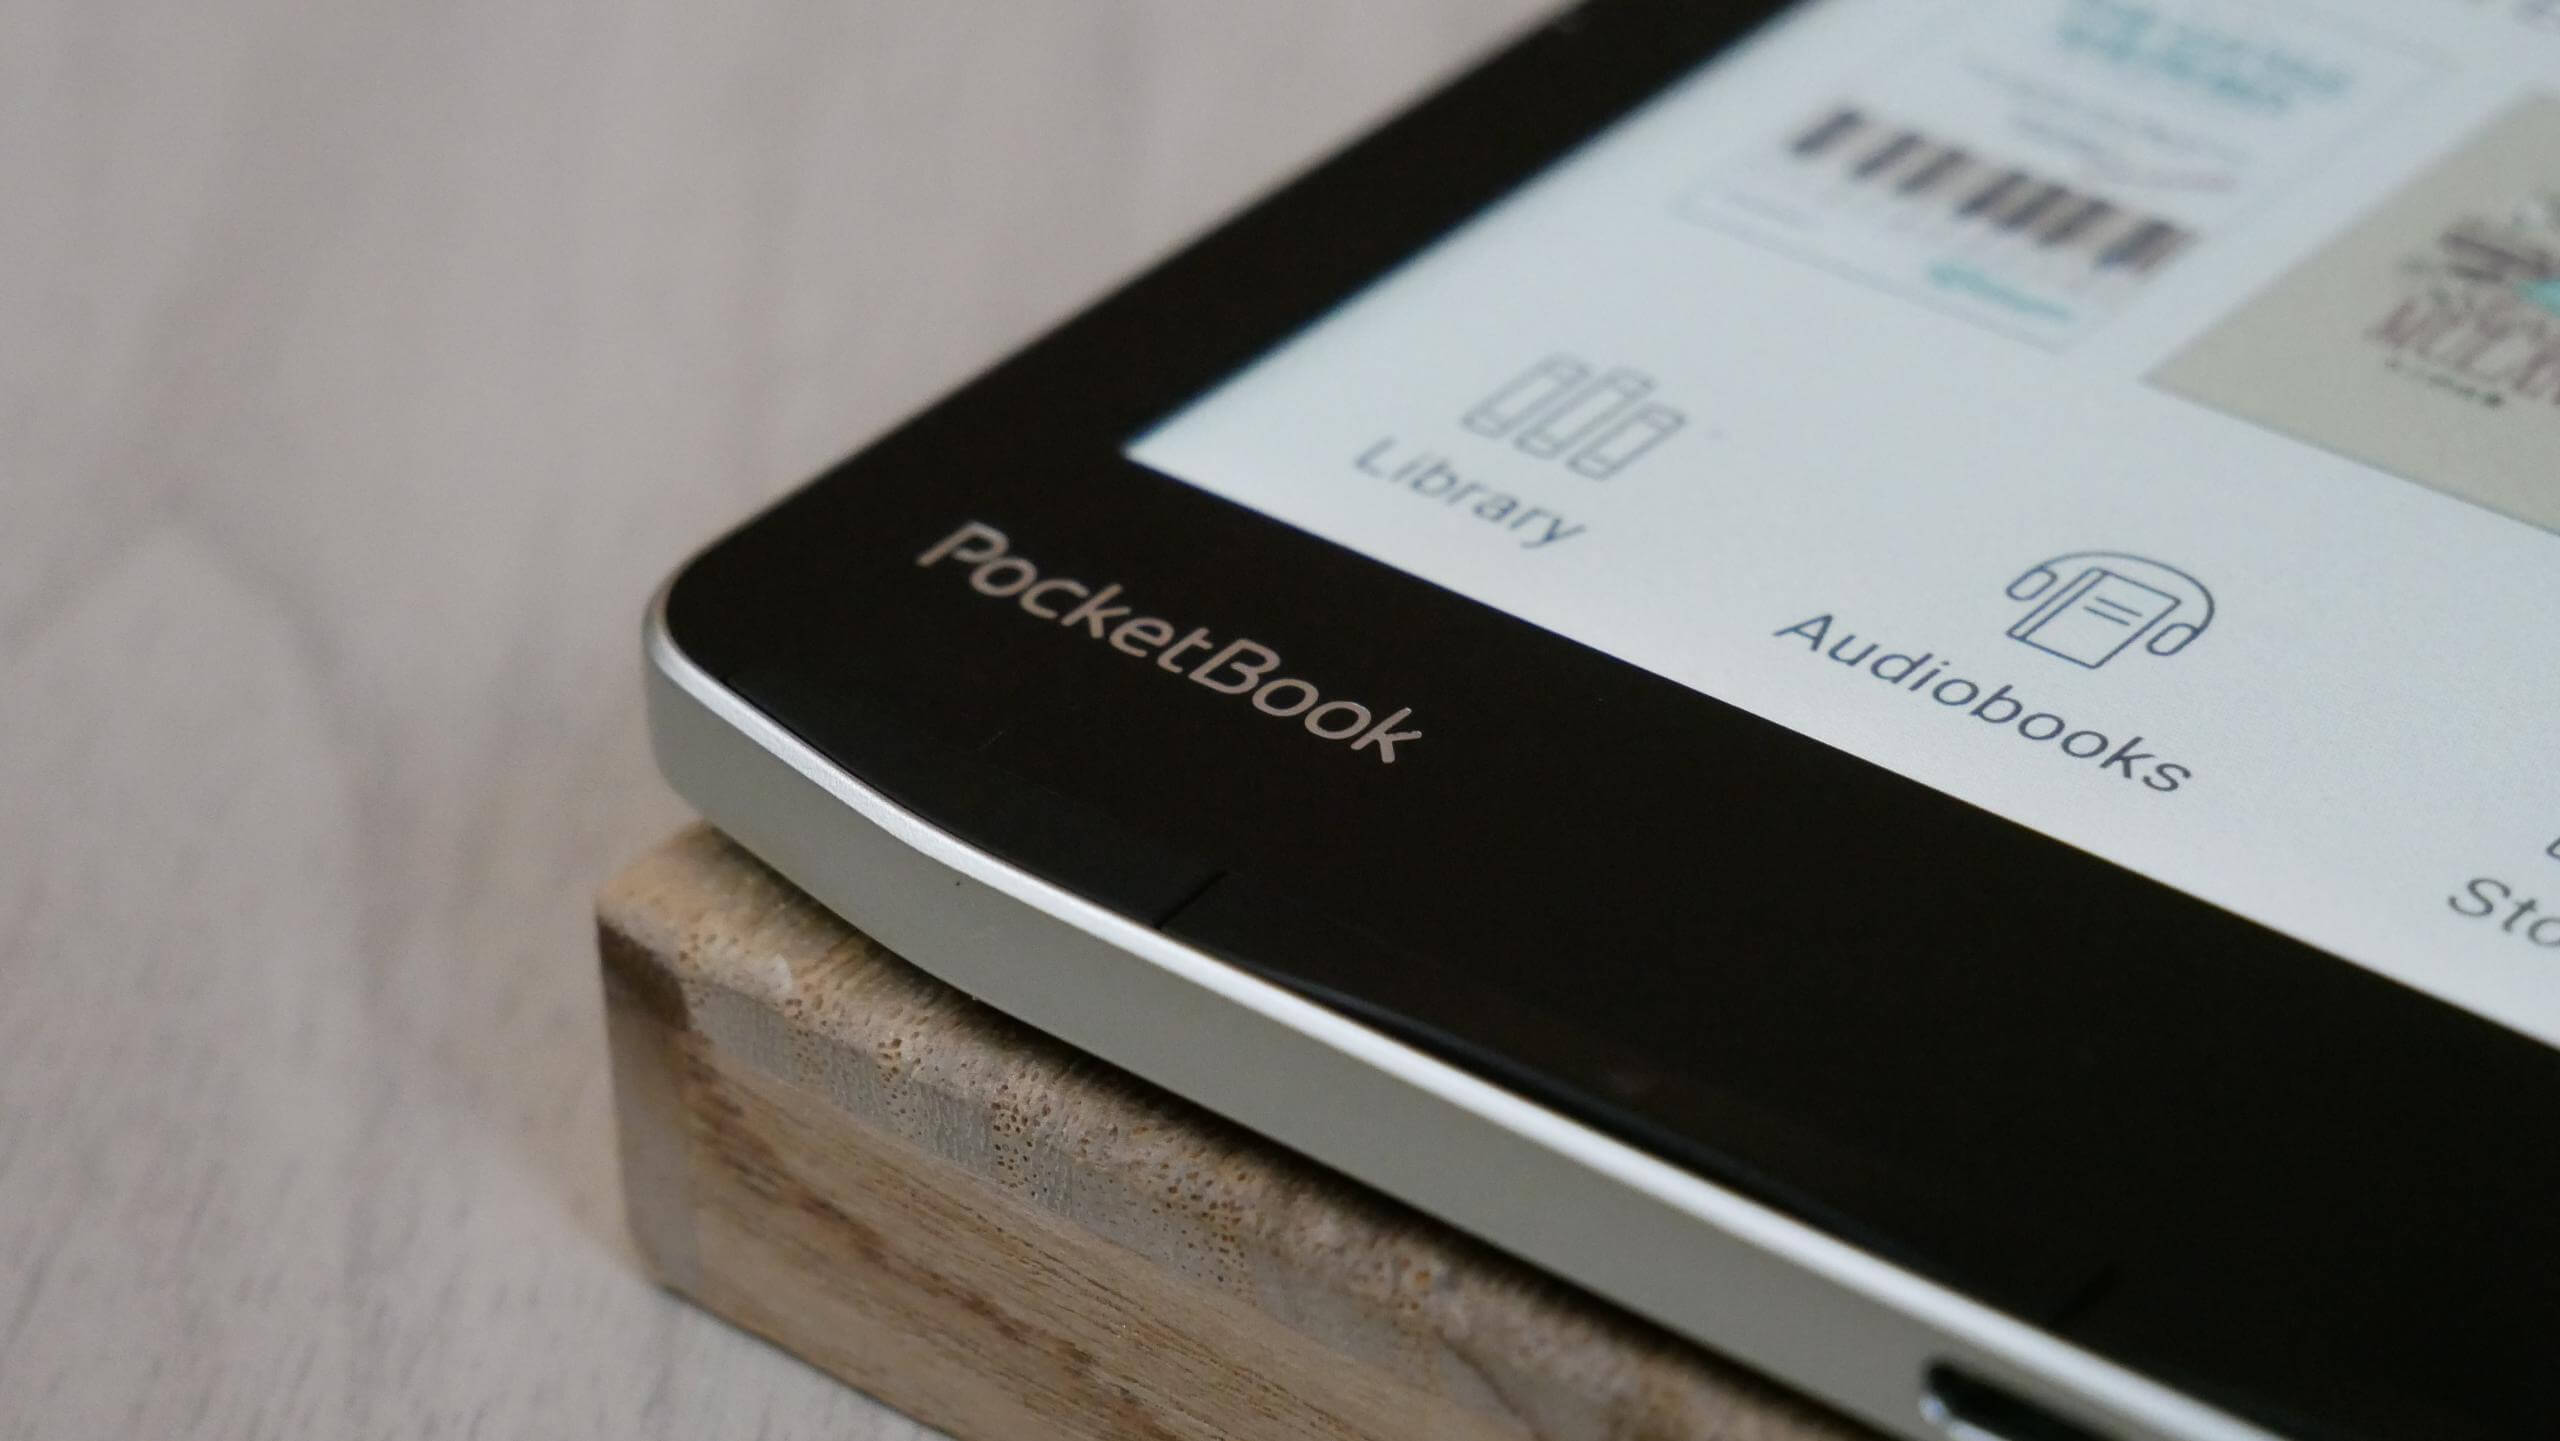 PocketBook's latest e-reader first to use new E Ink color display tech